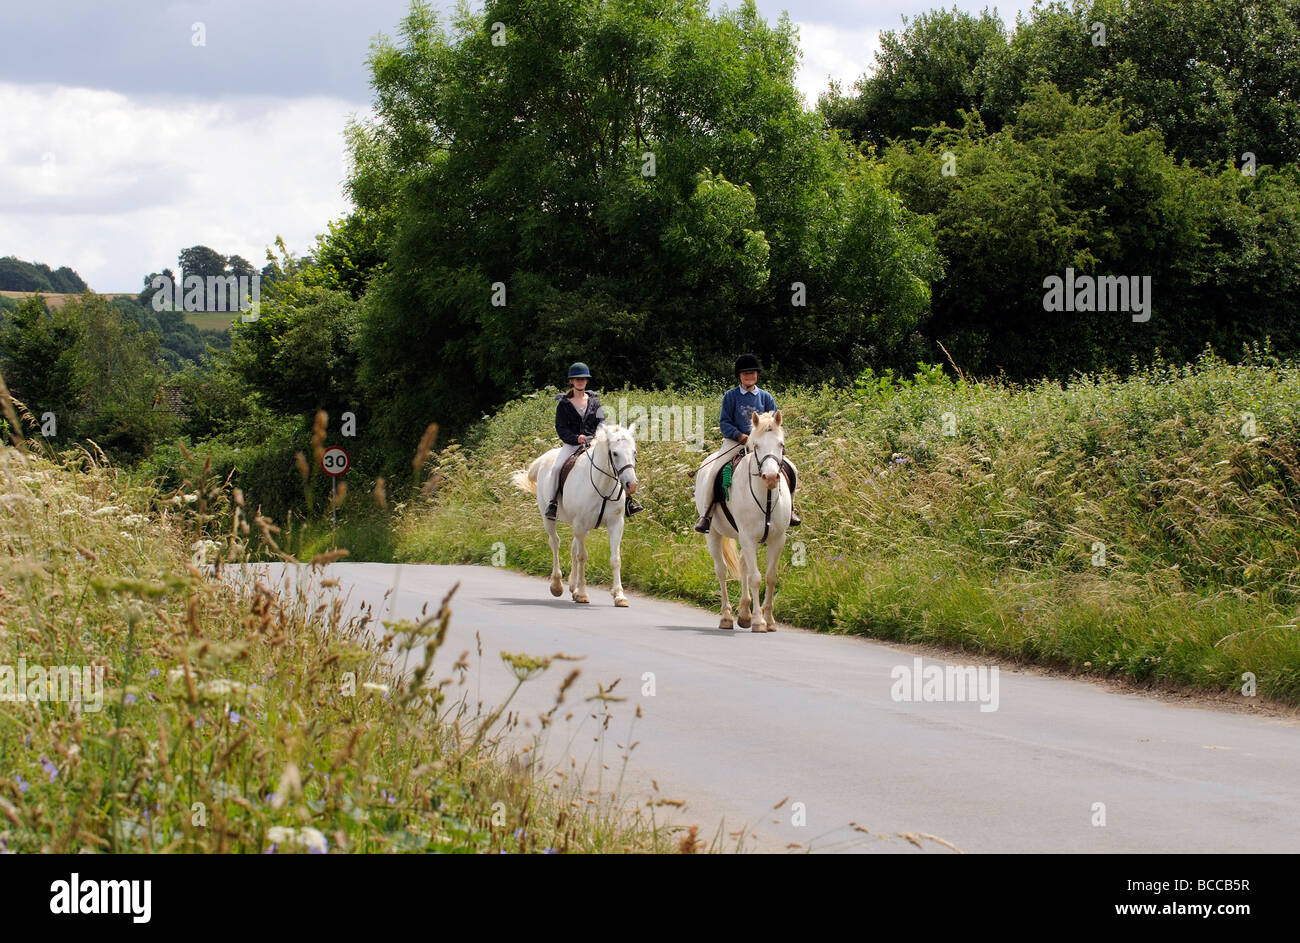 Horse riders on a country road in the Cotswolds Gloucestershire England UK Stock Photo